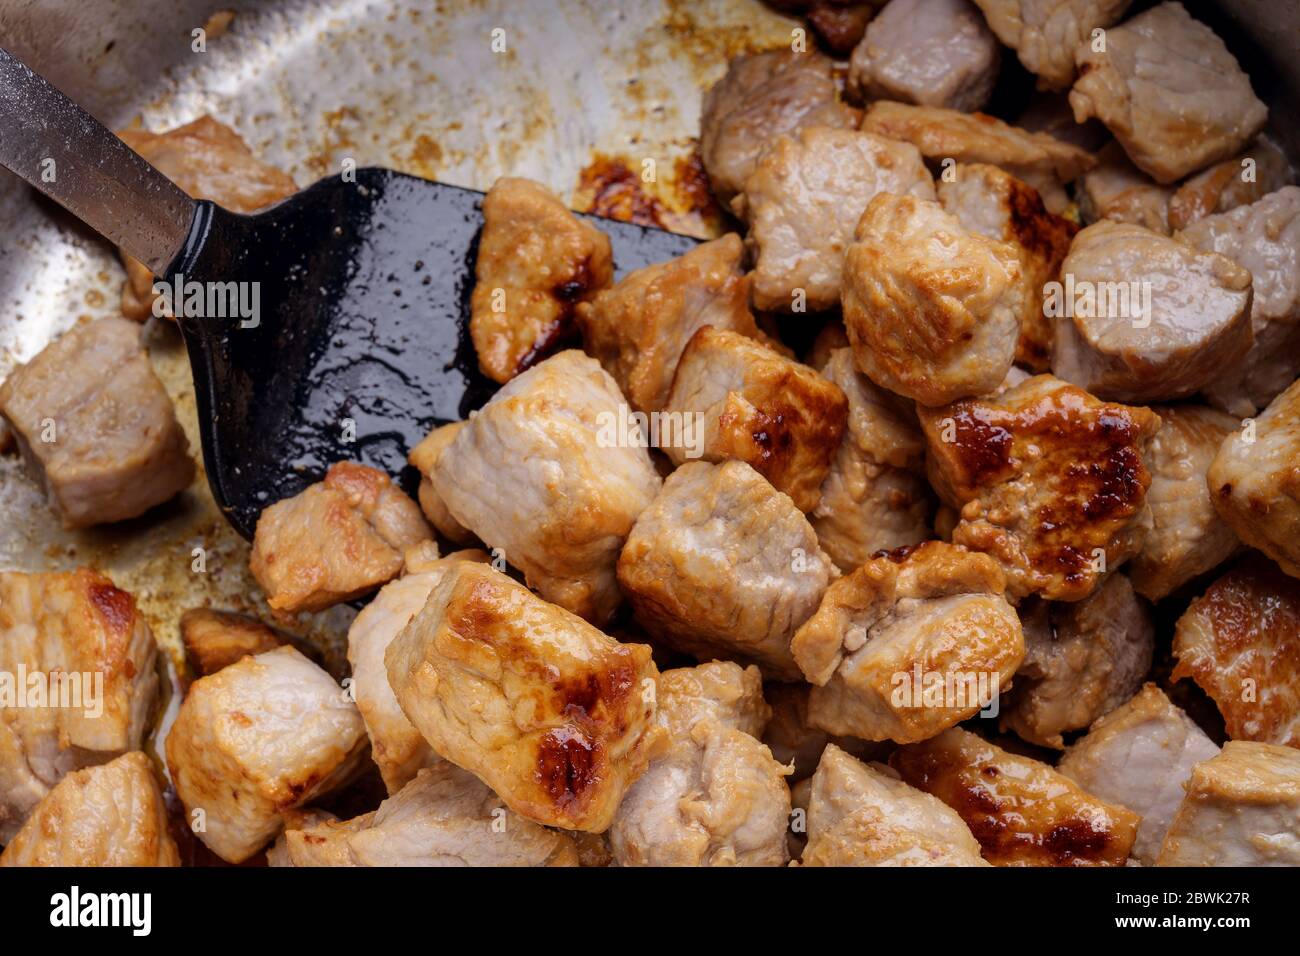 Searing pieces of pork meat are to get roasted aroma for a hearty stew, goulash or ragout, homemade cooking concept, close up, full frame background, Stock Photo